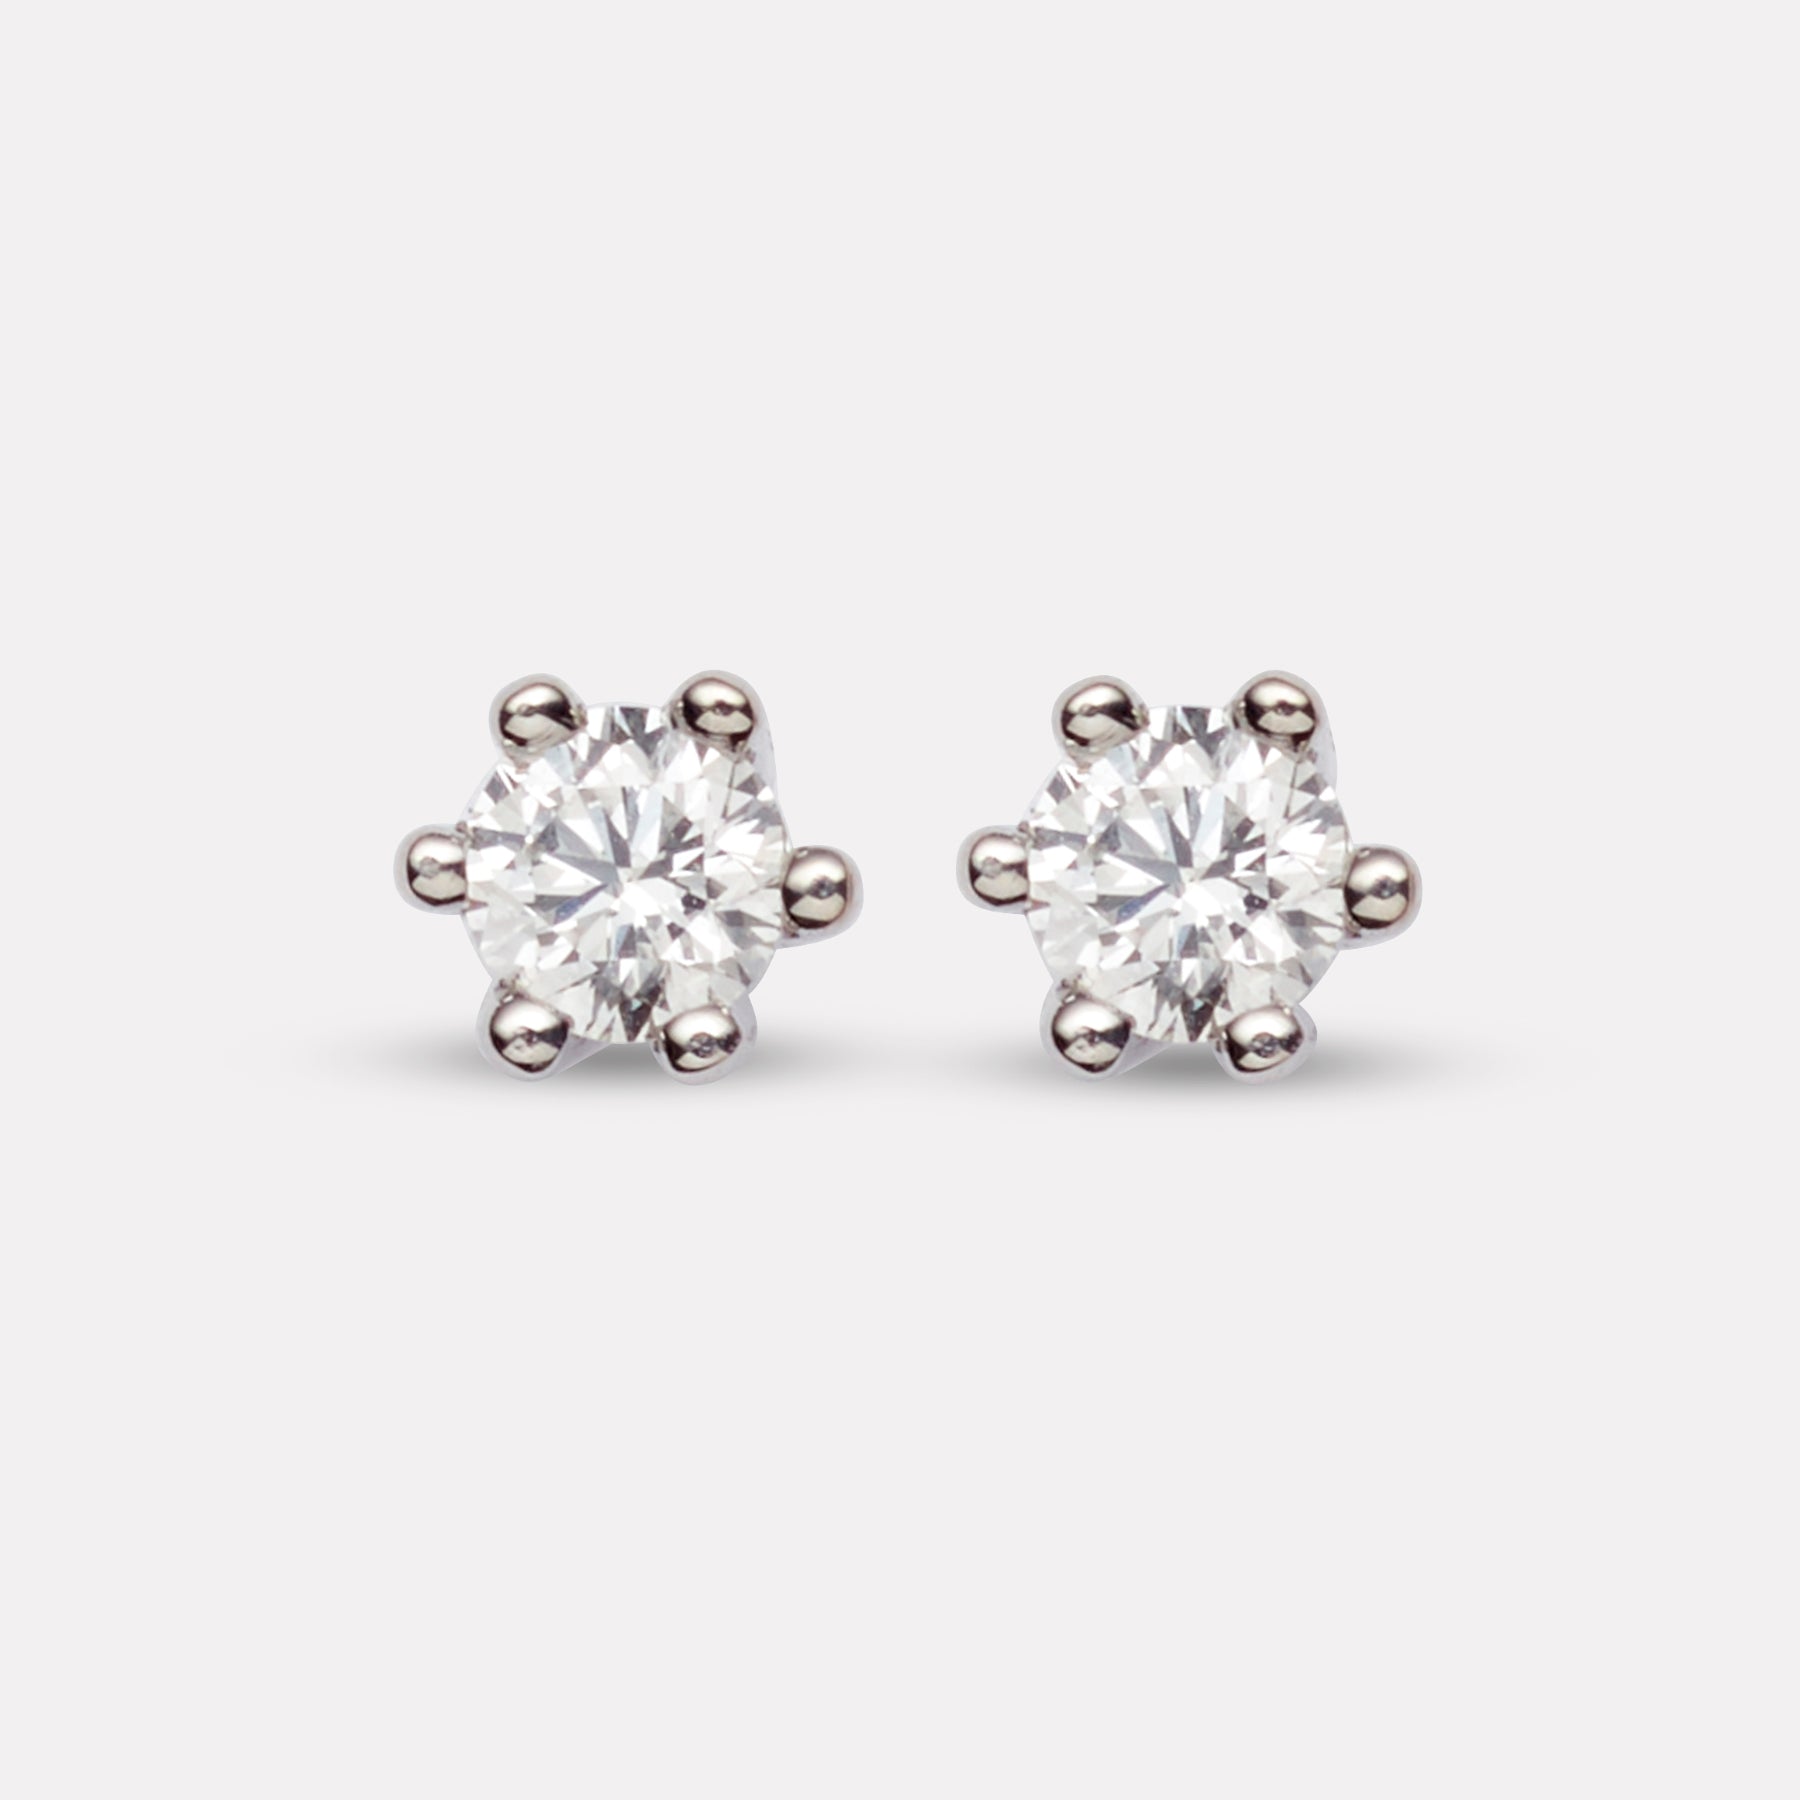 Marthe earrings in white gold with diamonds